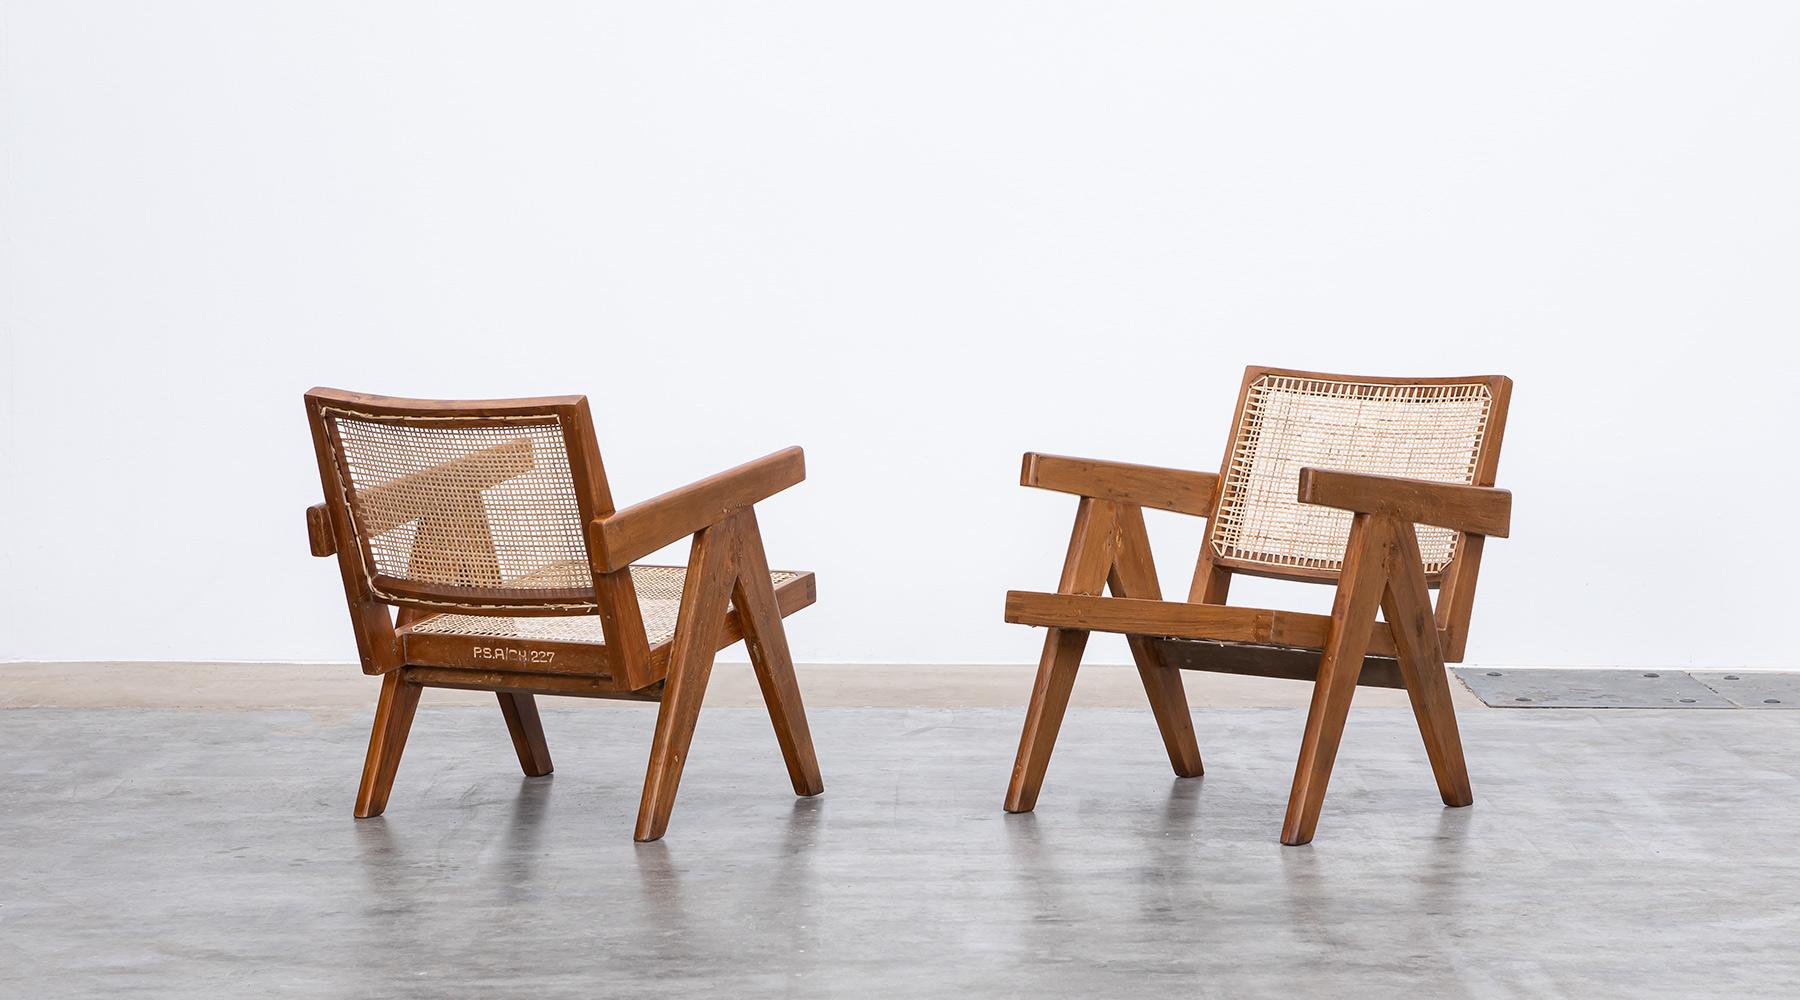 Lounge chairs designed by Pierre Jeanneret in teak and cane, Chandigarh, India, 1955.

These original lounge chairs designed by Pierre Jeanneret in teak with woven cane on the seat and curved backrest appears in beautiful patina. Both chairs have